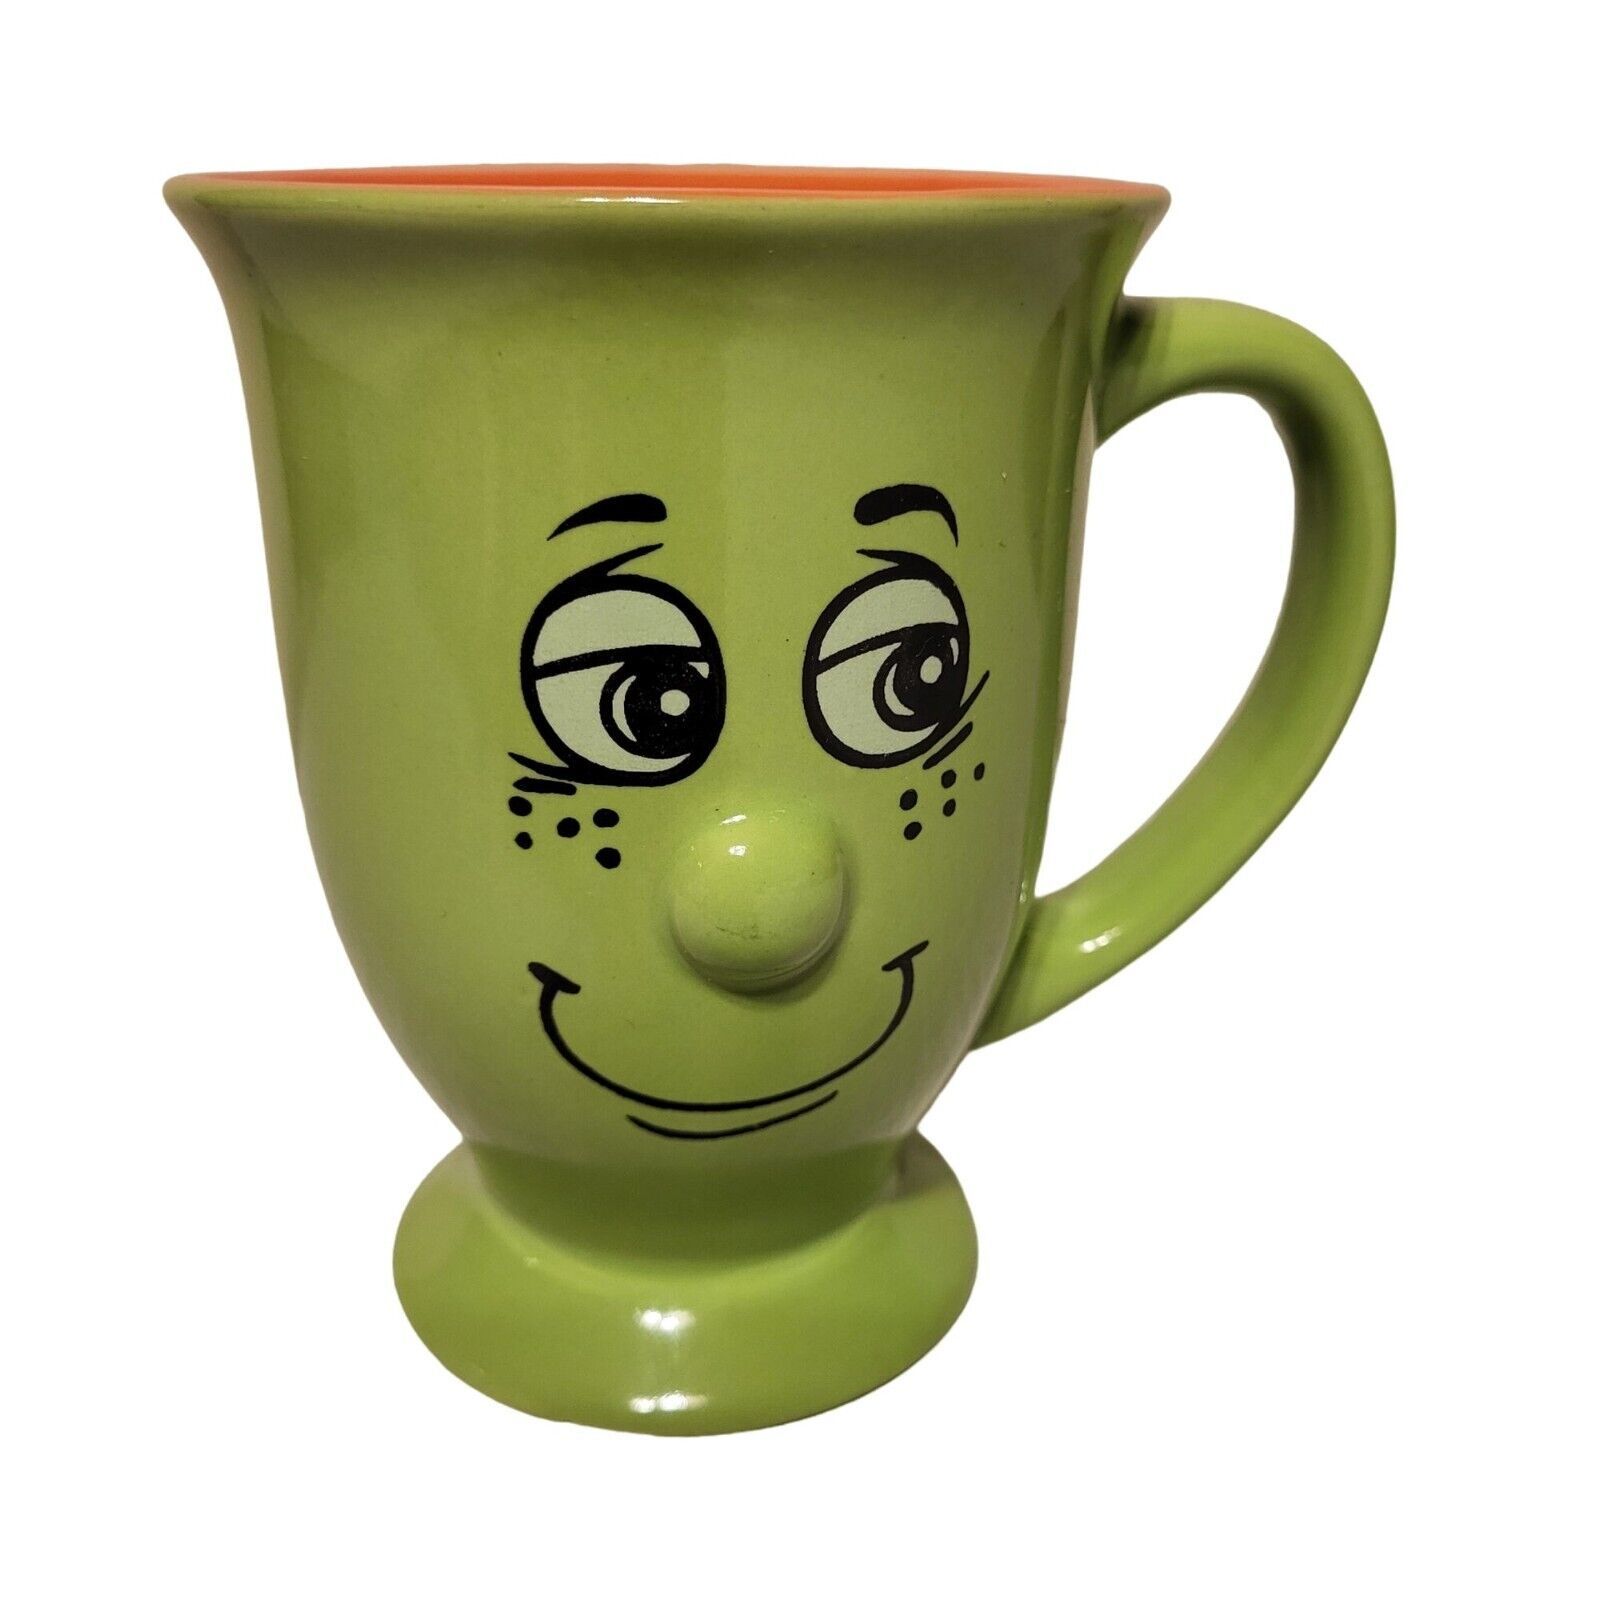 Primary image for Vintage Tradewinds Tableware Green Footed Coffee Mug Tea Cup Happy Silly Face